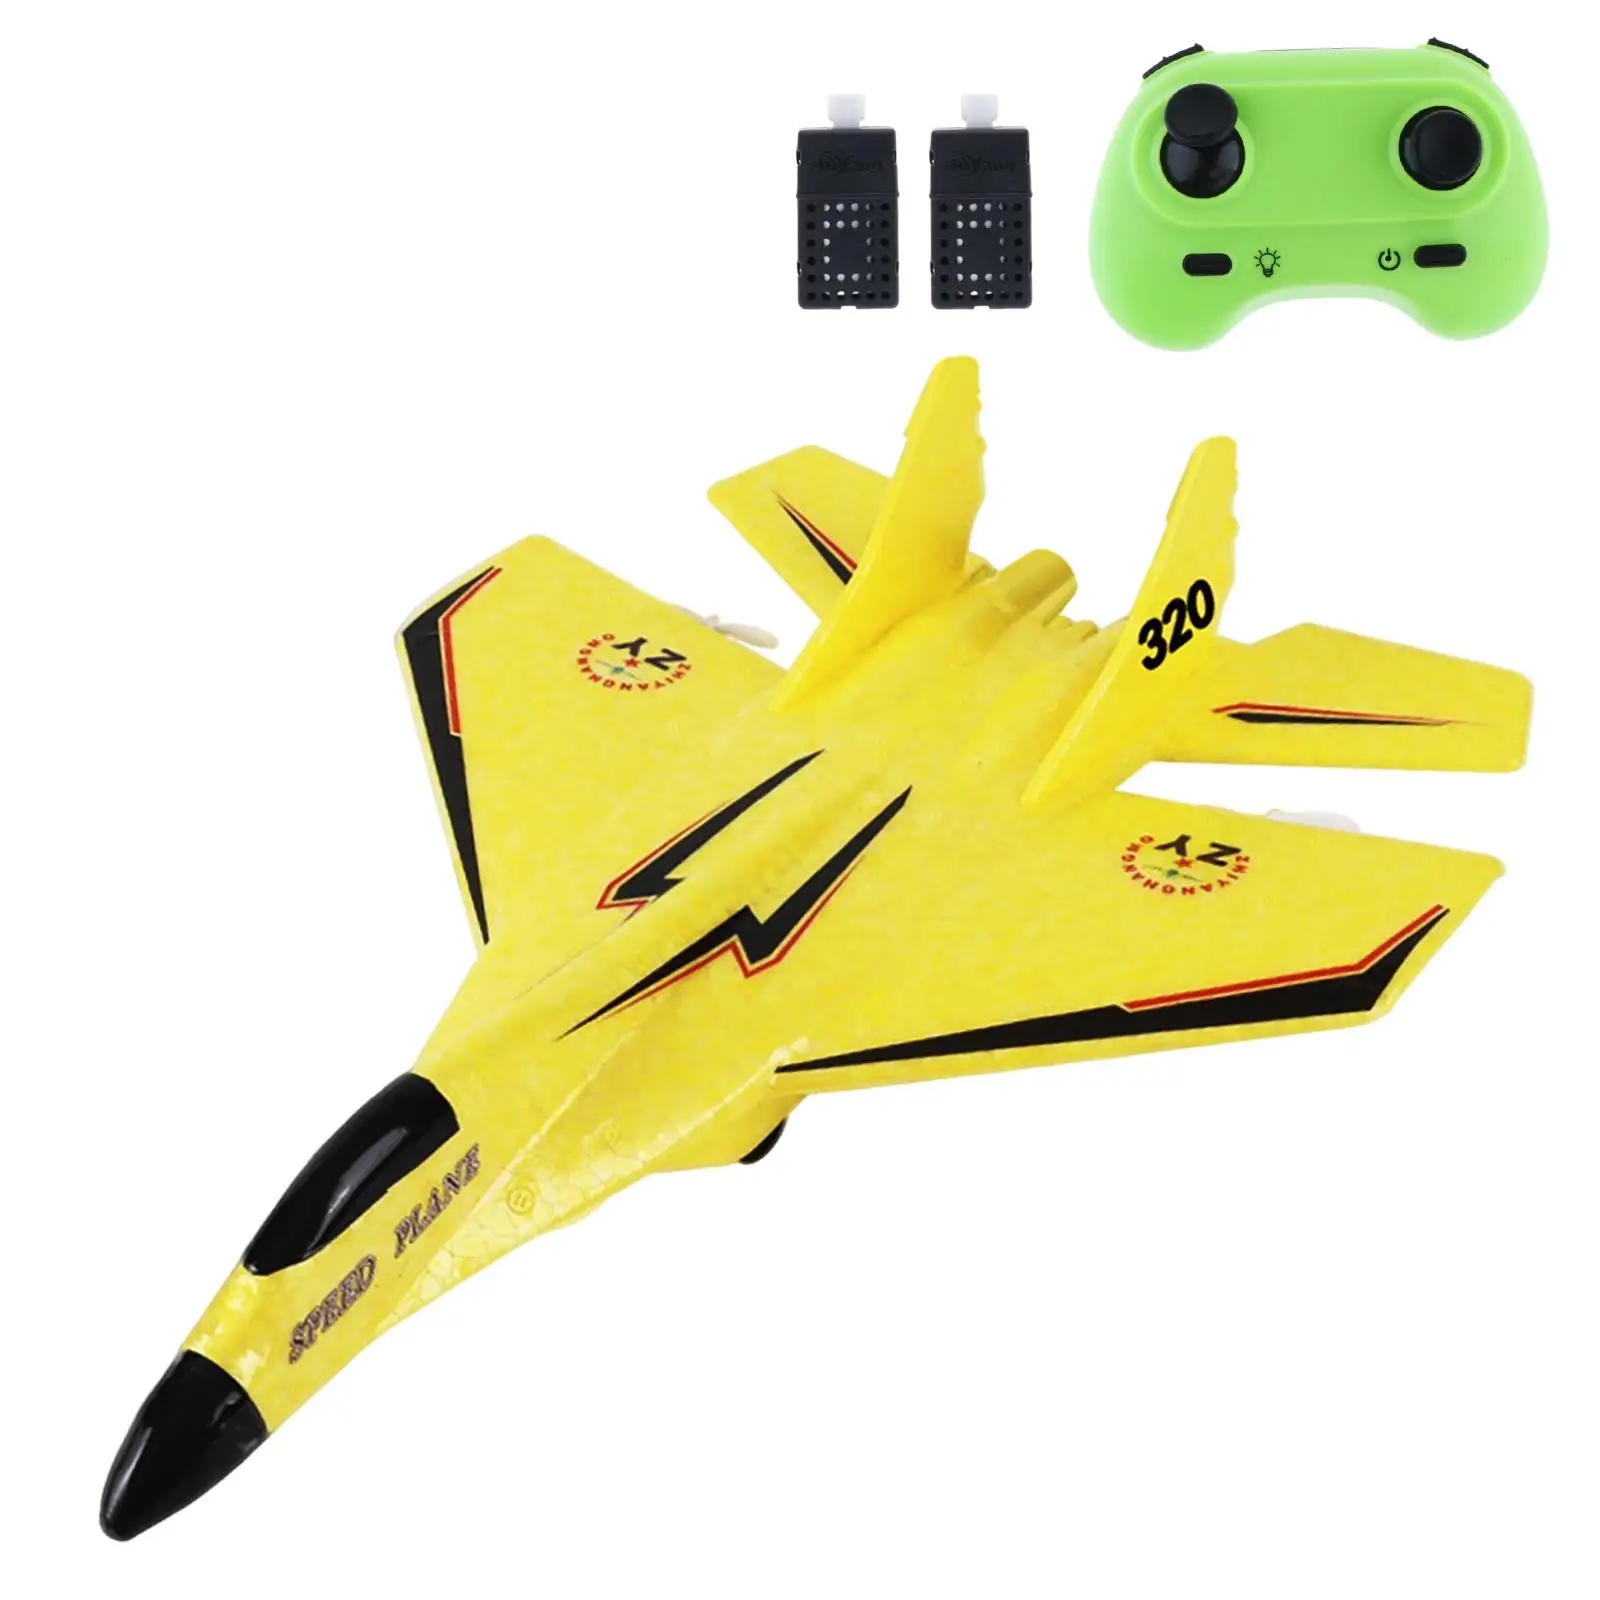 2 CH RC 2.4G Portable Easy to Control Gift Lightweight with Light 2 Channel RC Glider for Kids Boys Girls Beginner Adults